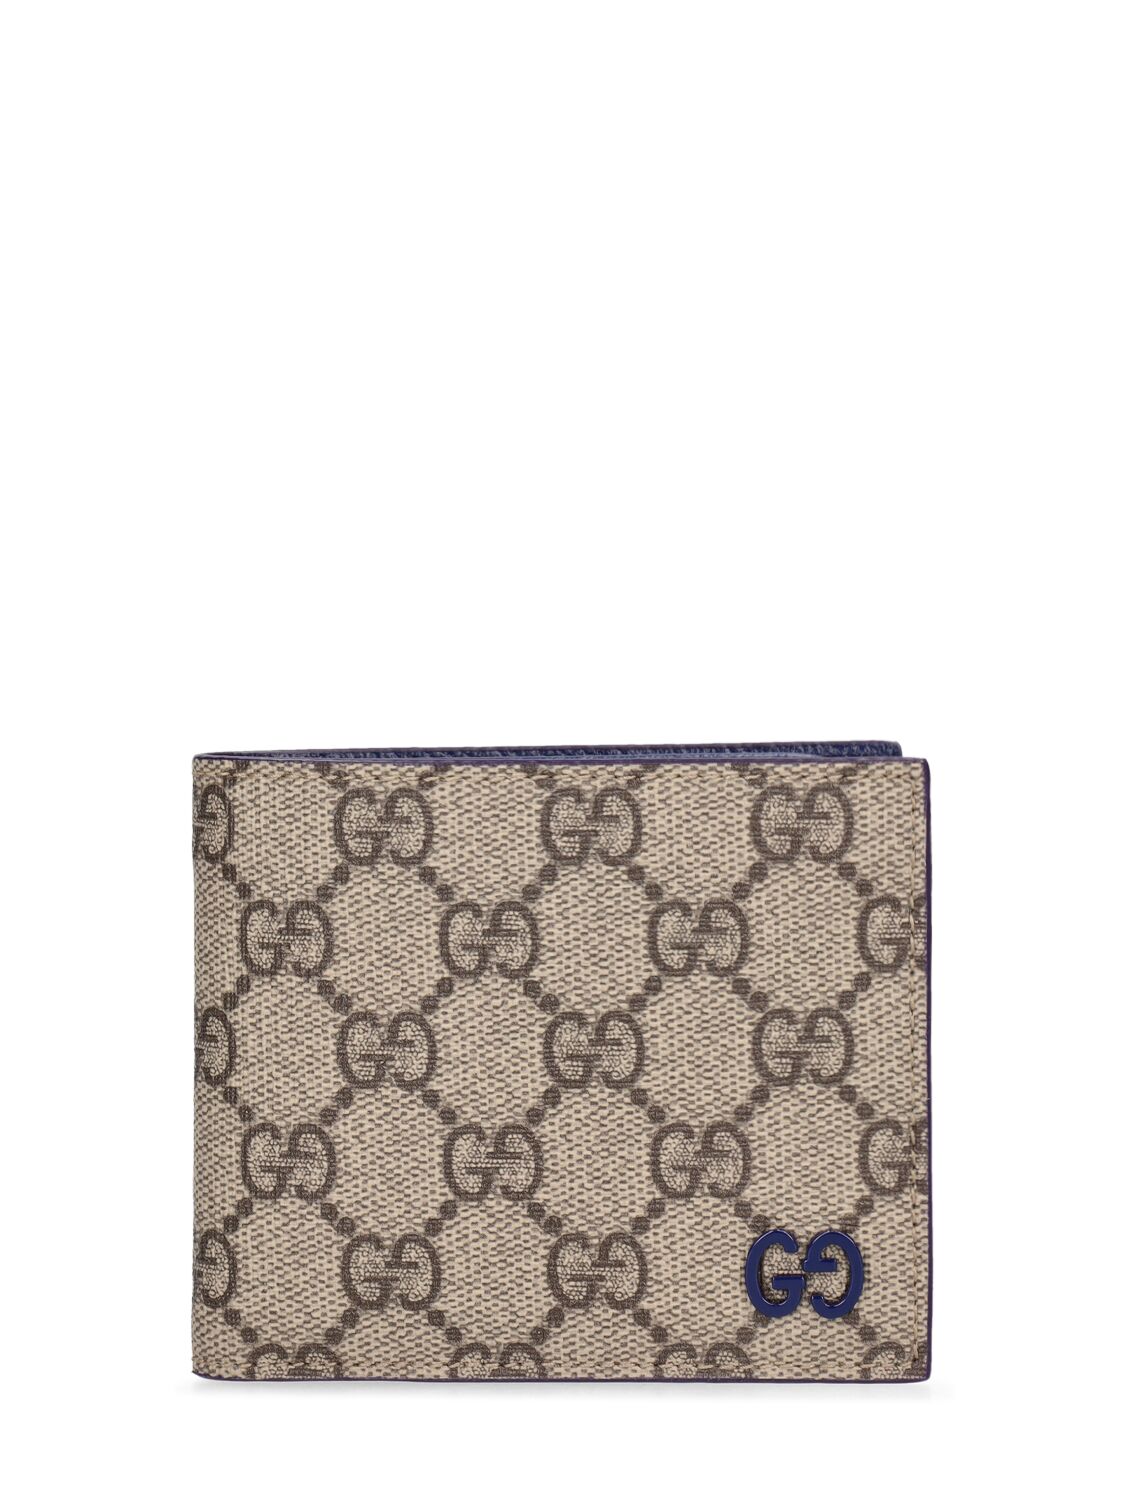 Gucci Gg Supreme Wallet In Blue